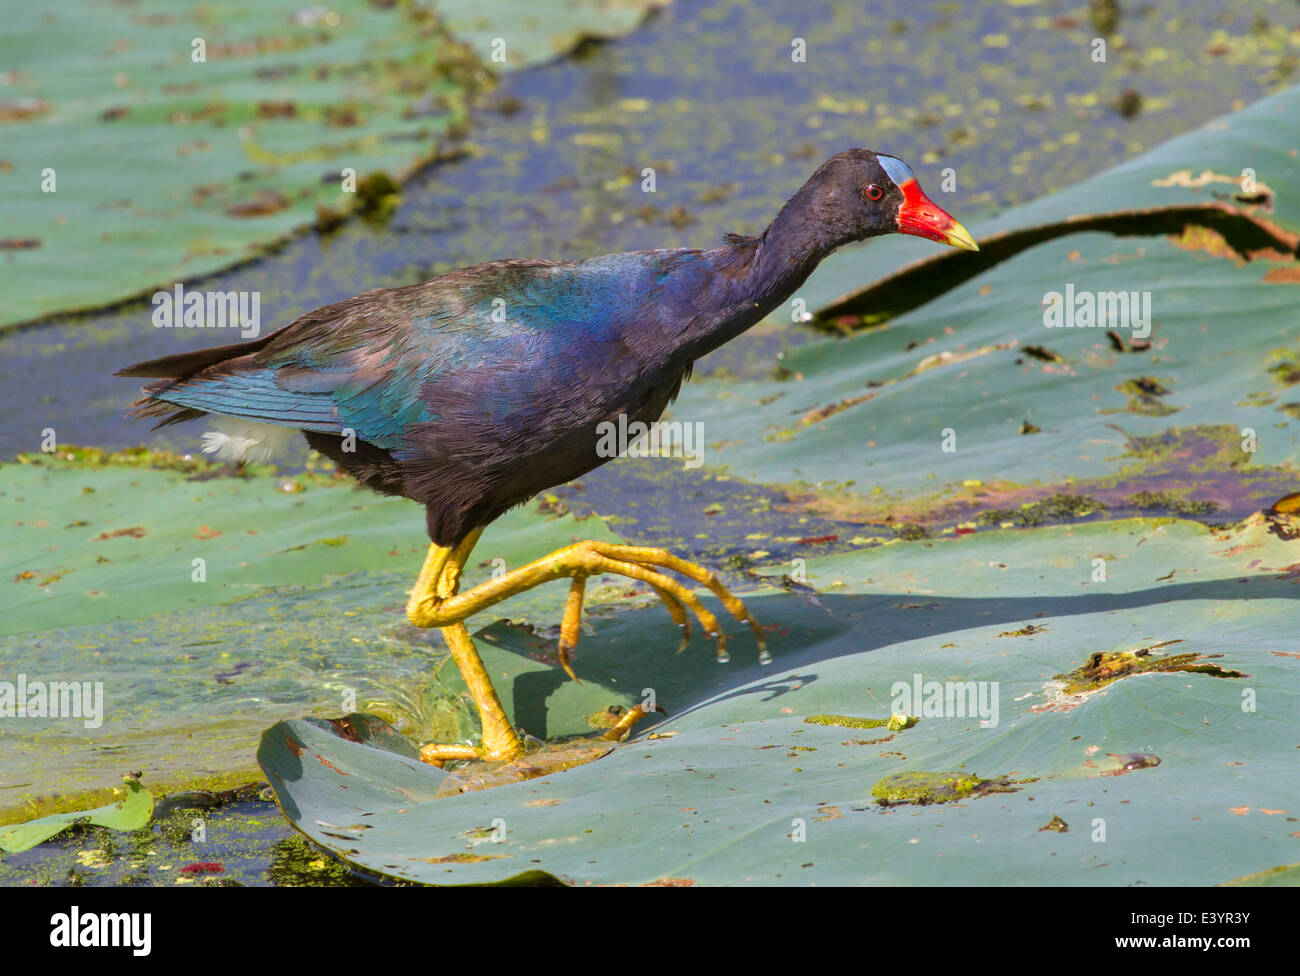 Purple Gallinule (Porphyrio martinica) walking on the floating lotus leaves in a lake. Stock Photo